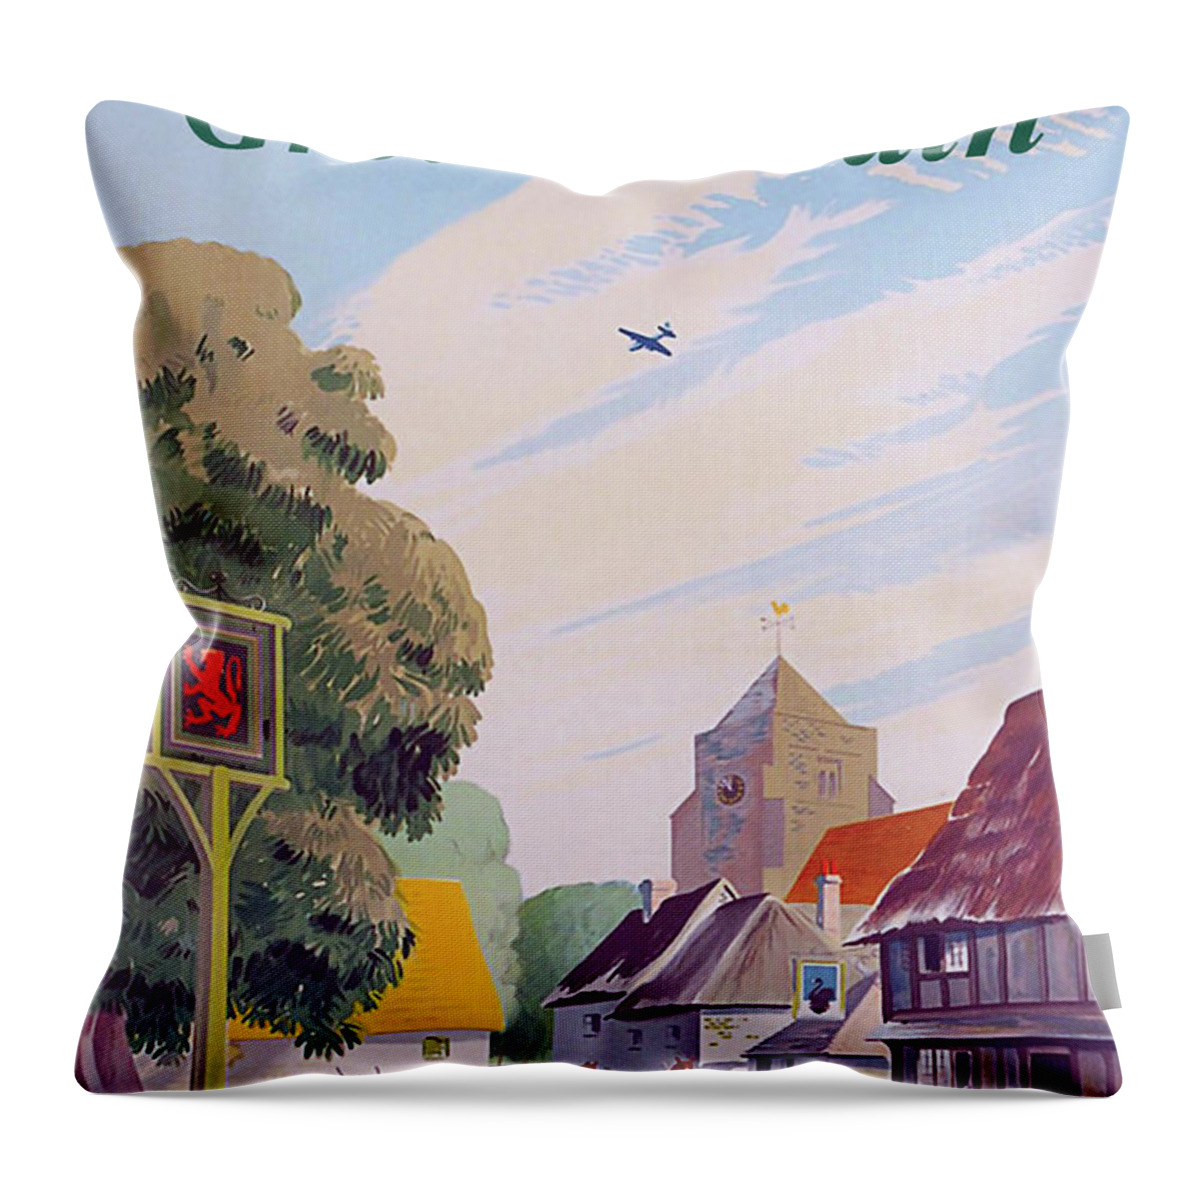 Great Britain Throw Pillow featuring the digital art Great Britain by Long Shot